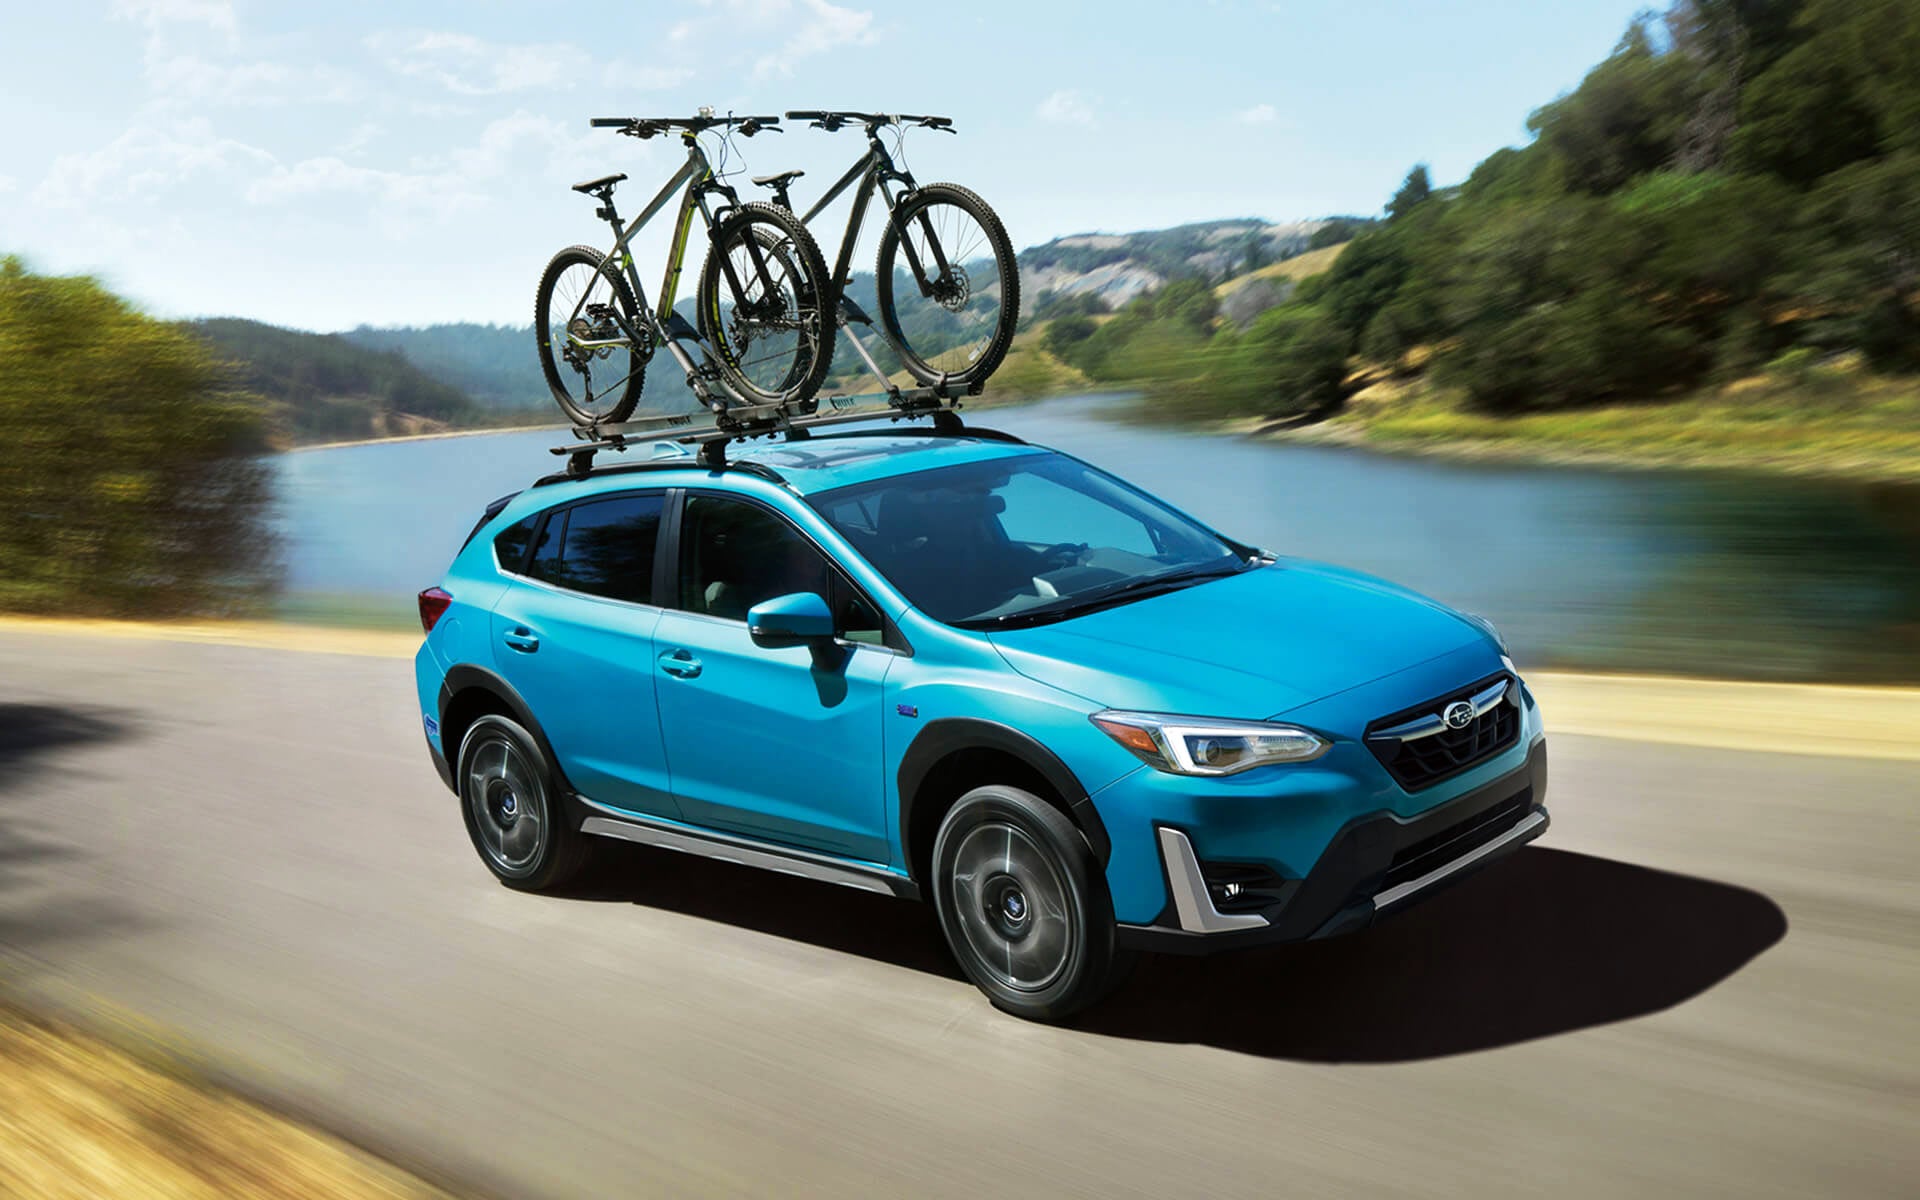 A blue Crosstrek Hybrid with two bicycles on its roof rack driving beside a river | DELLA Subaru of Plattsburgh in Plattsburgh NY